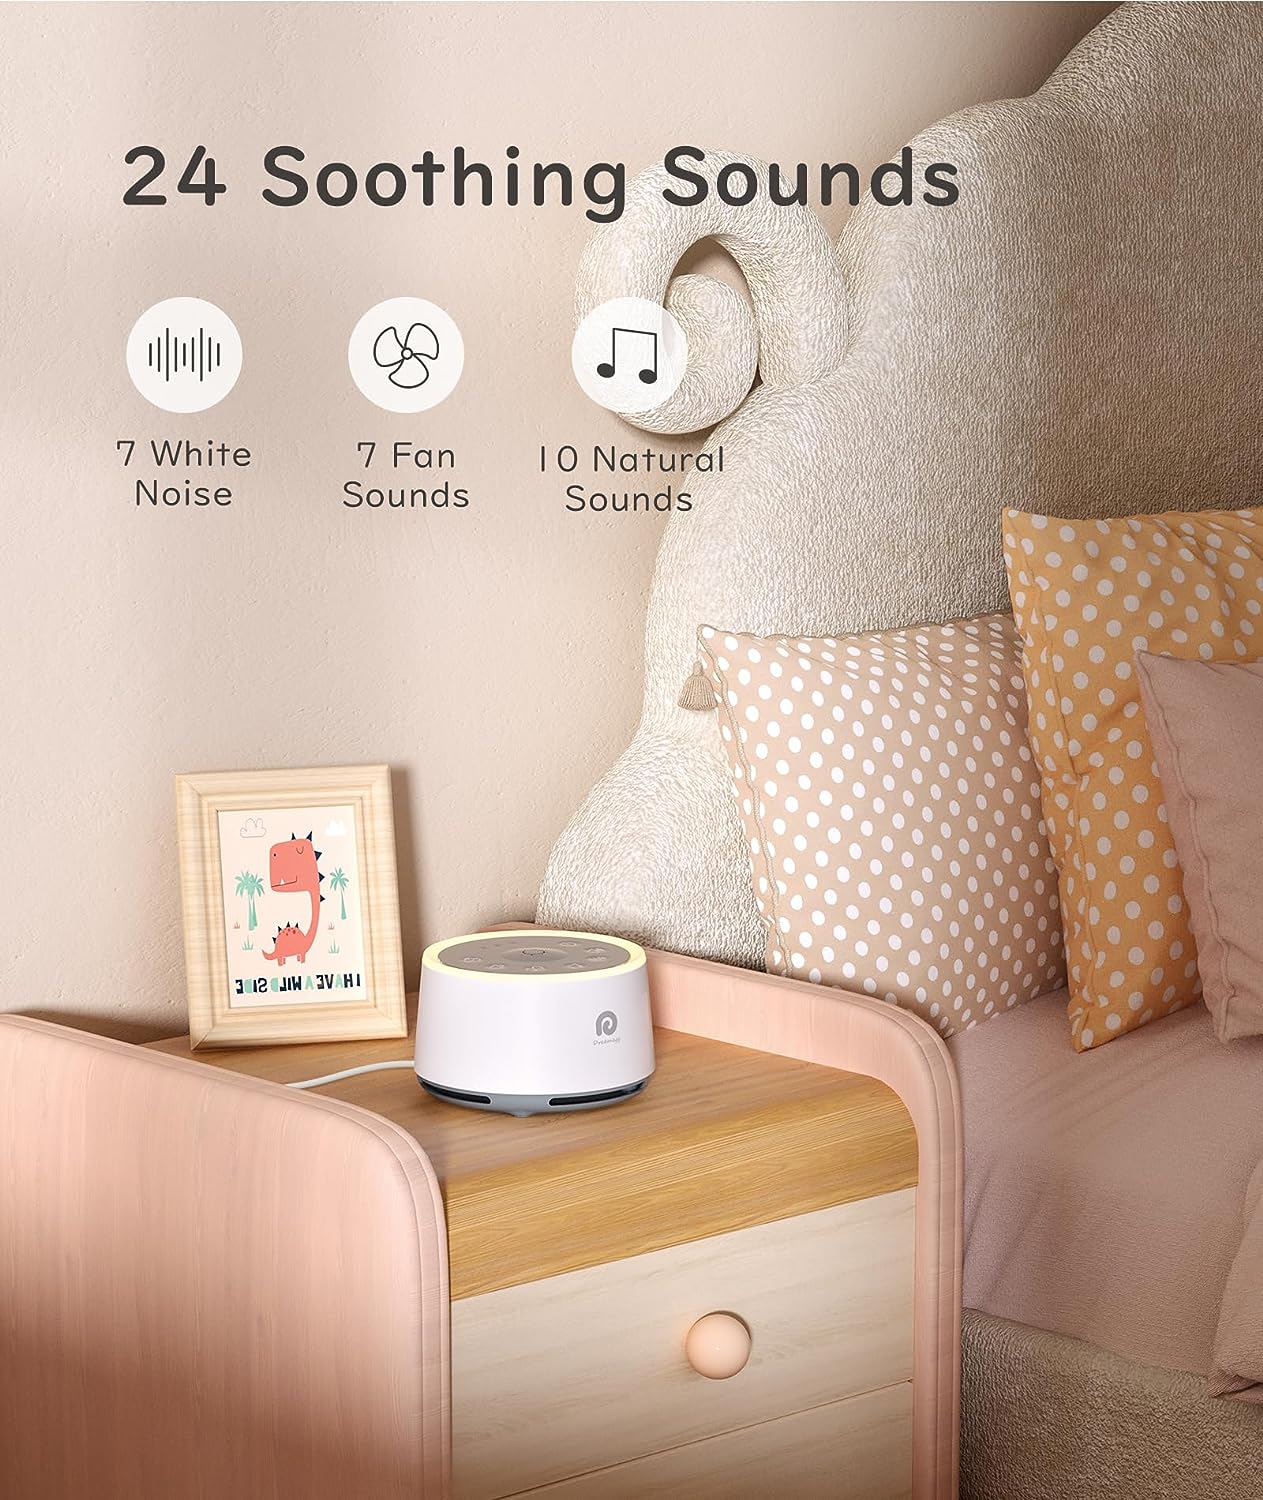 Dreamegg D1 Sound Machine Baby - White Noise Machine for Baby with Night Light, 24 High Fidelity Sounds, Timer & Memory Feature, Noise Machine for Baby Adults, Home, Office, Travel (White)